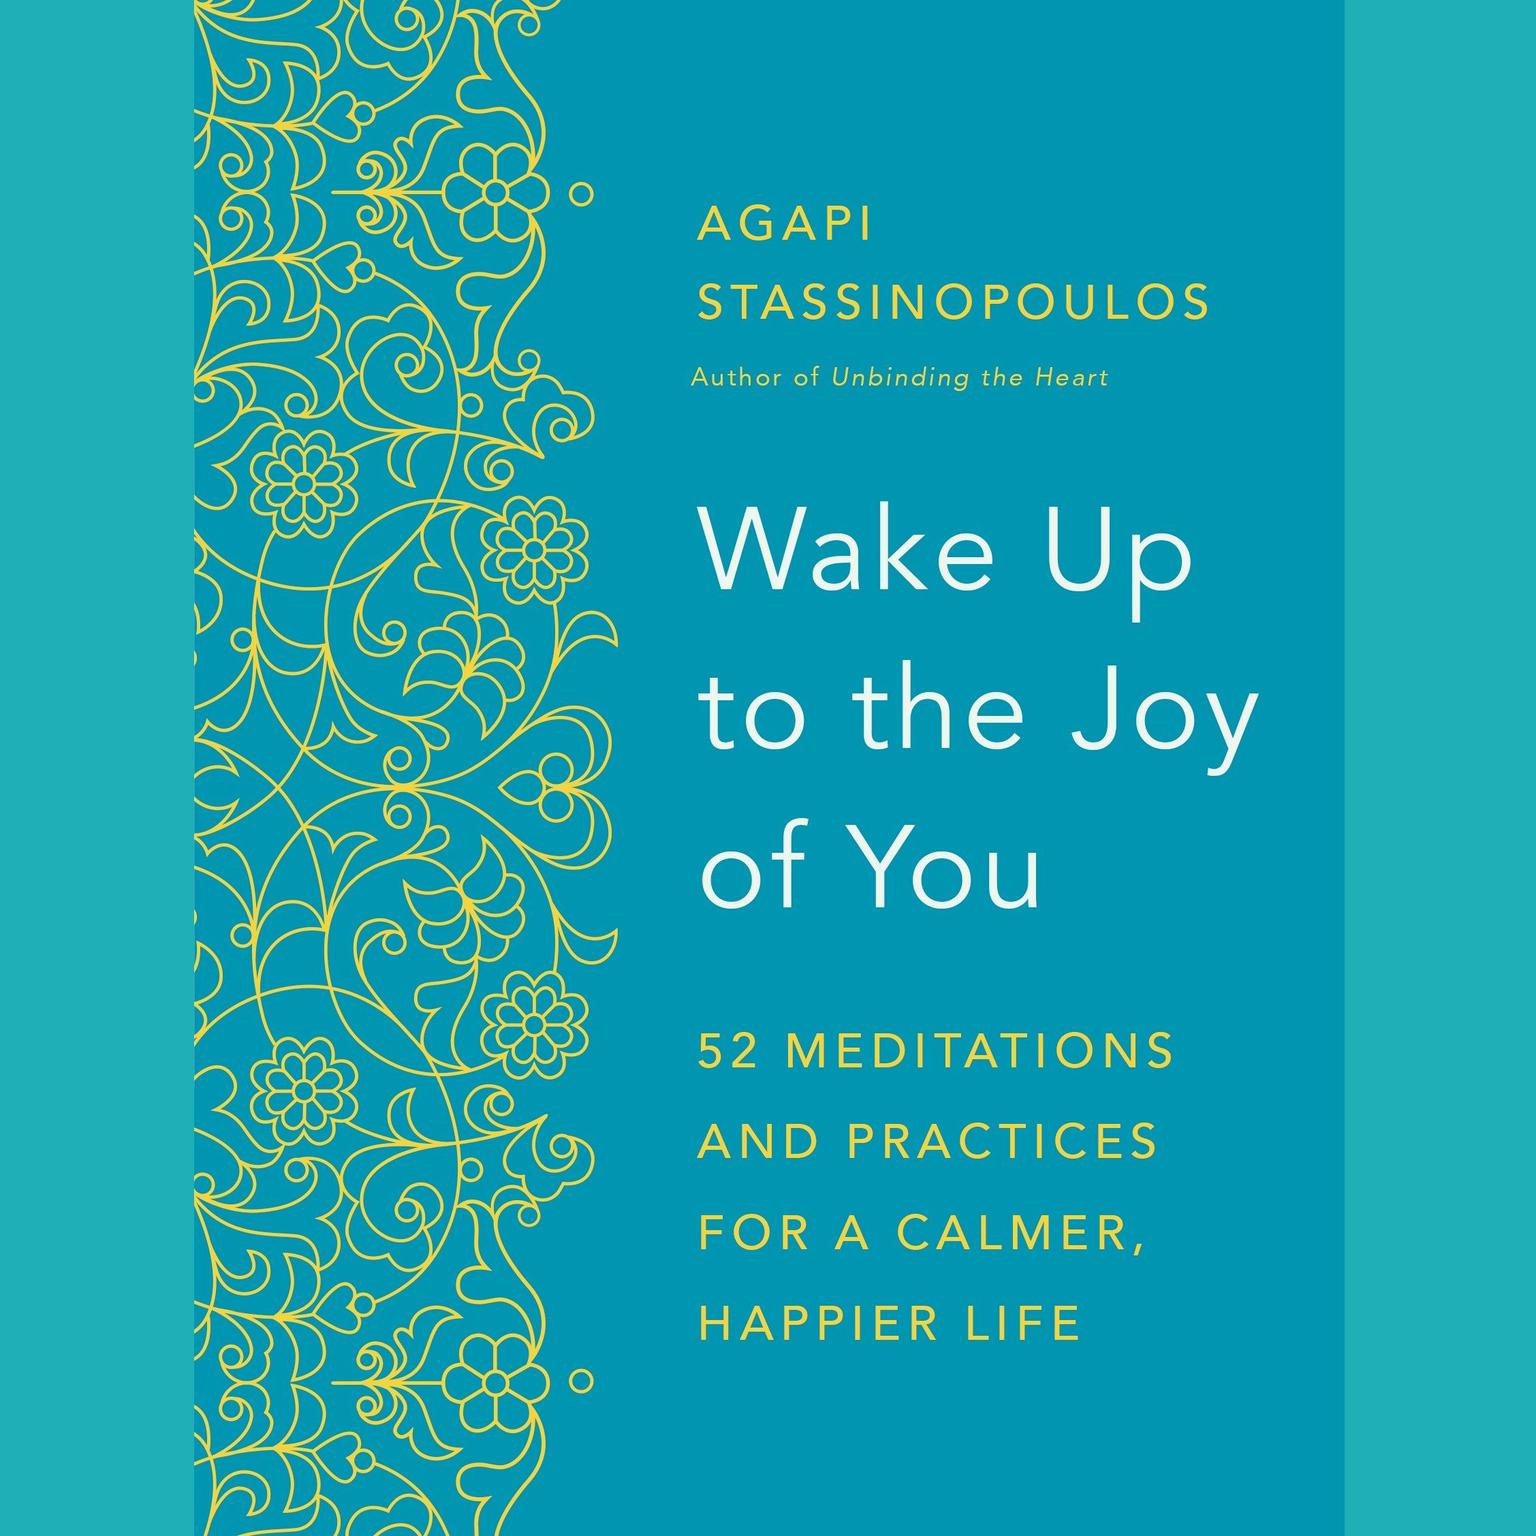 Wake Up to the Joy of You: 52 Meditations and Practices for a Calmer, Happier Life Audiobook, by Agapi Stassinopoulos